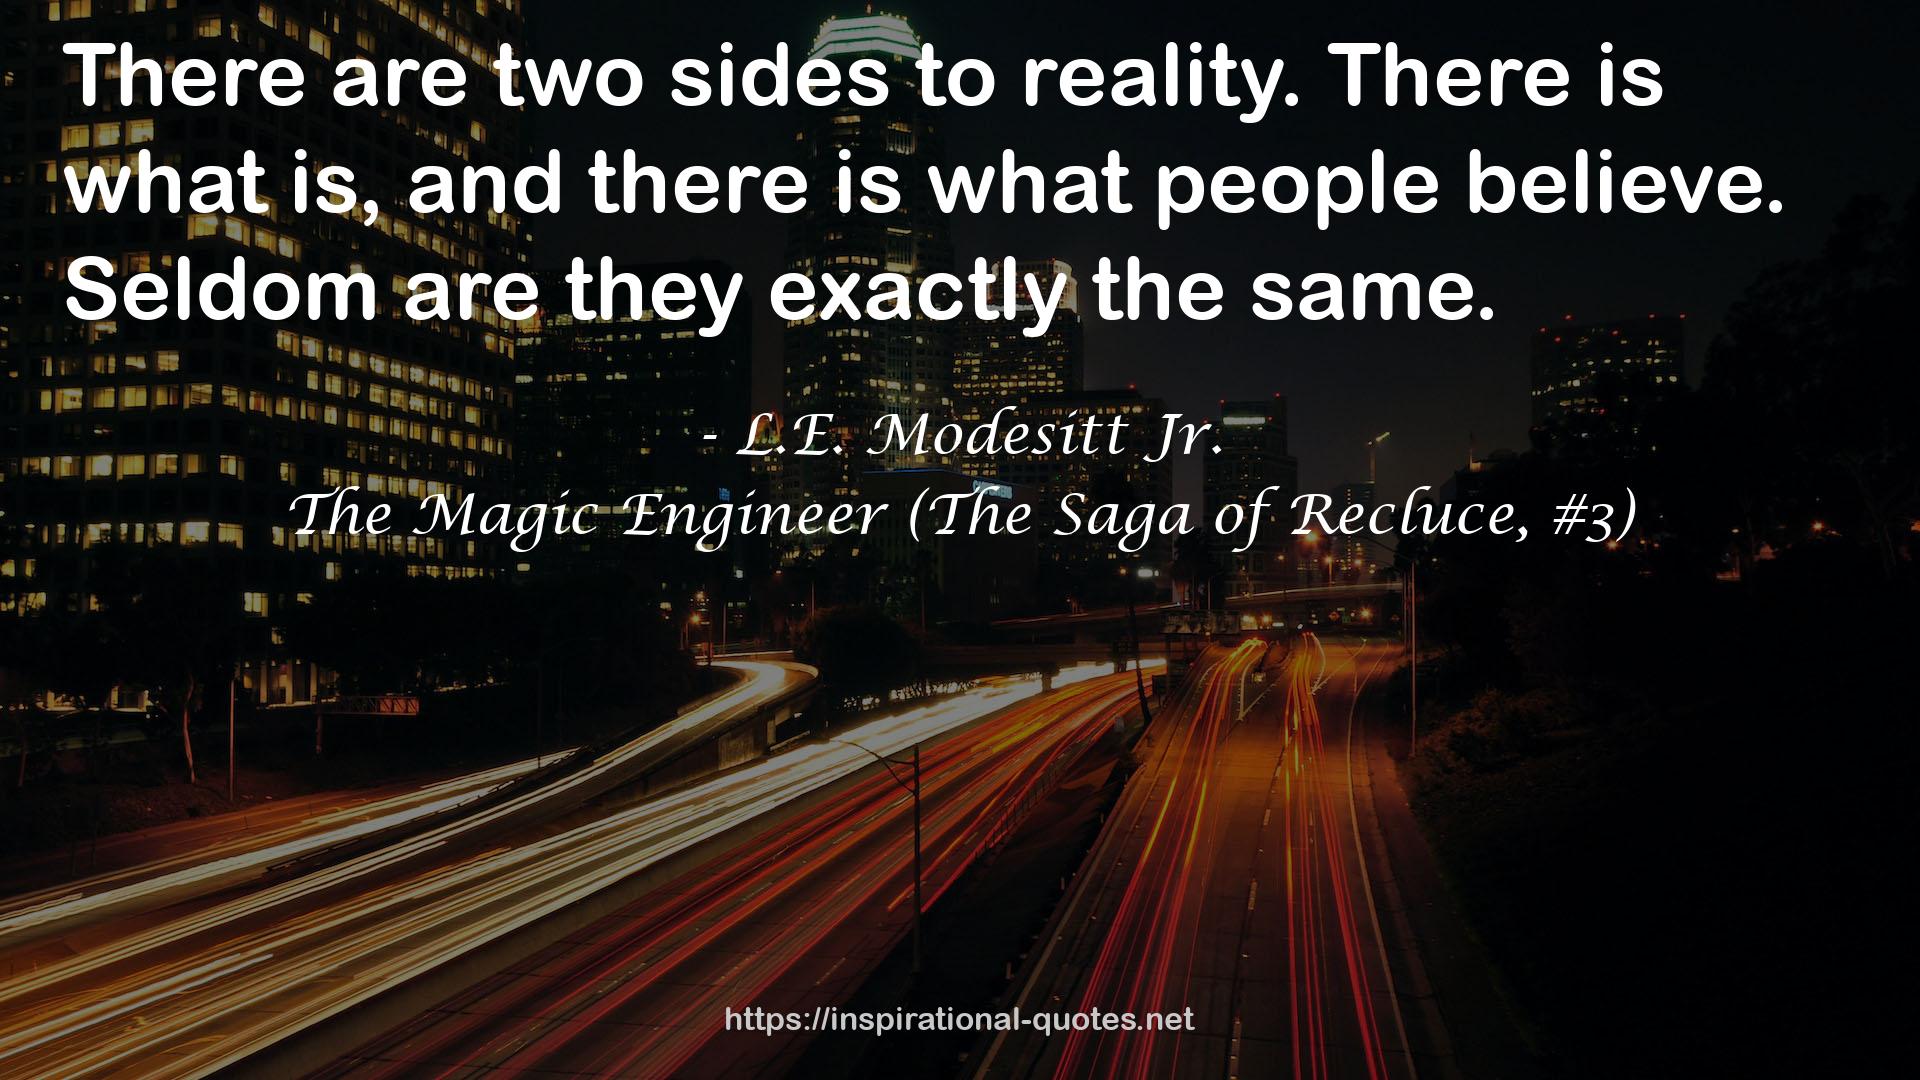 The Magic Engineer (The Saga of Recluce, #3) QUOTES